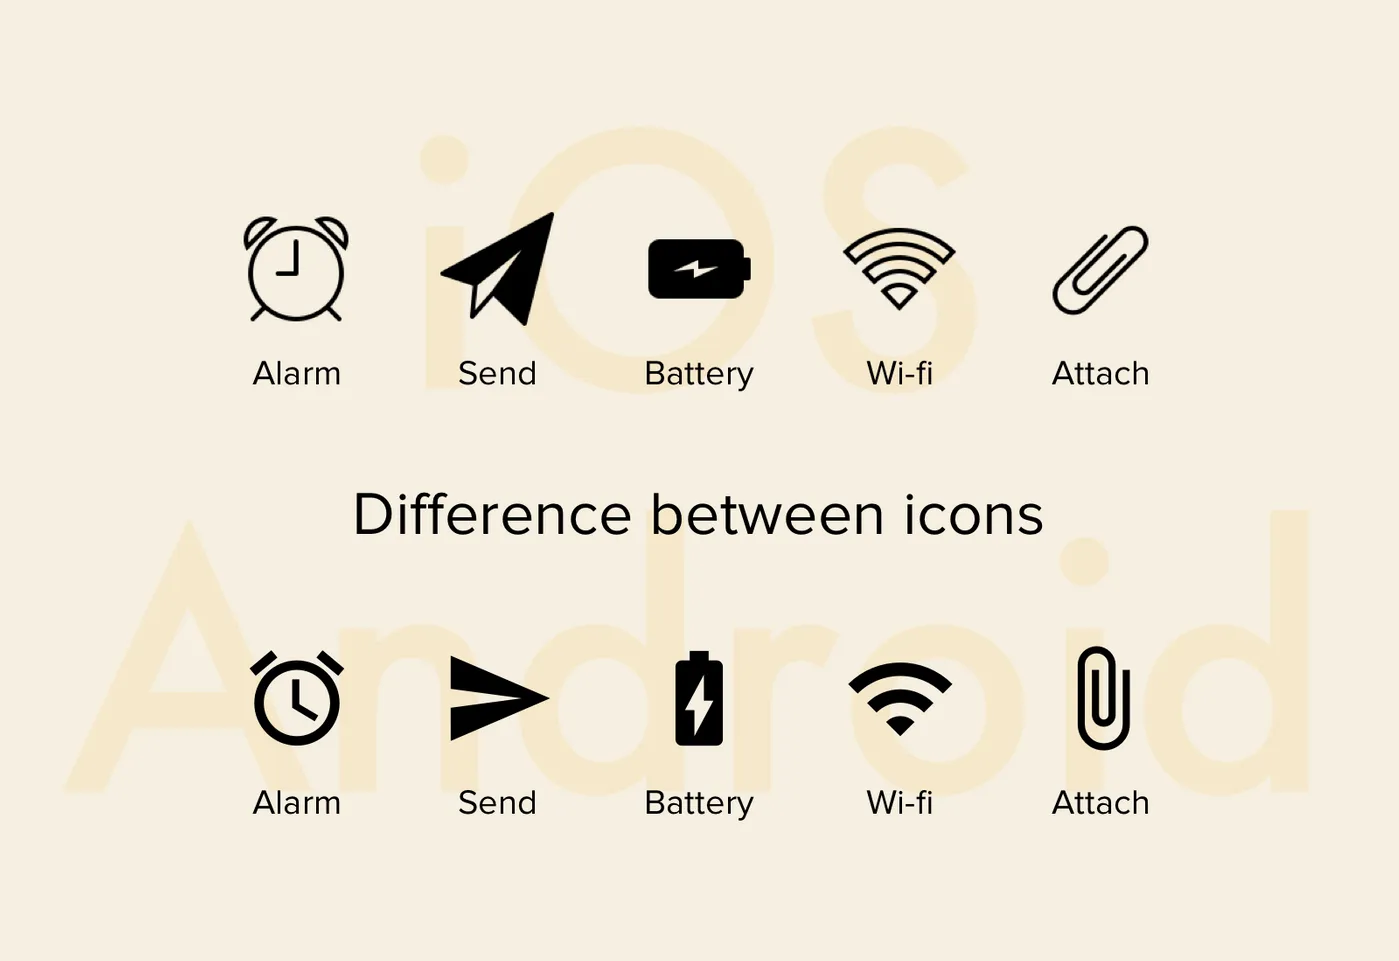 Comparison of icons on iOS and Android